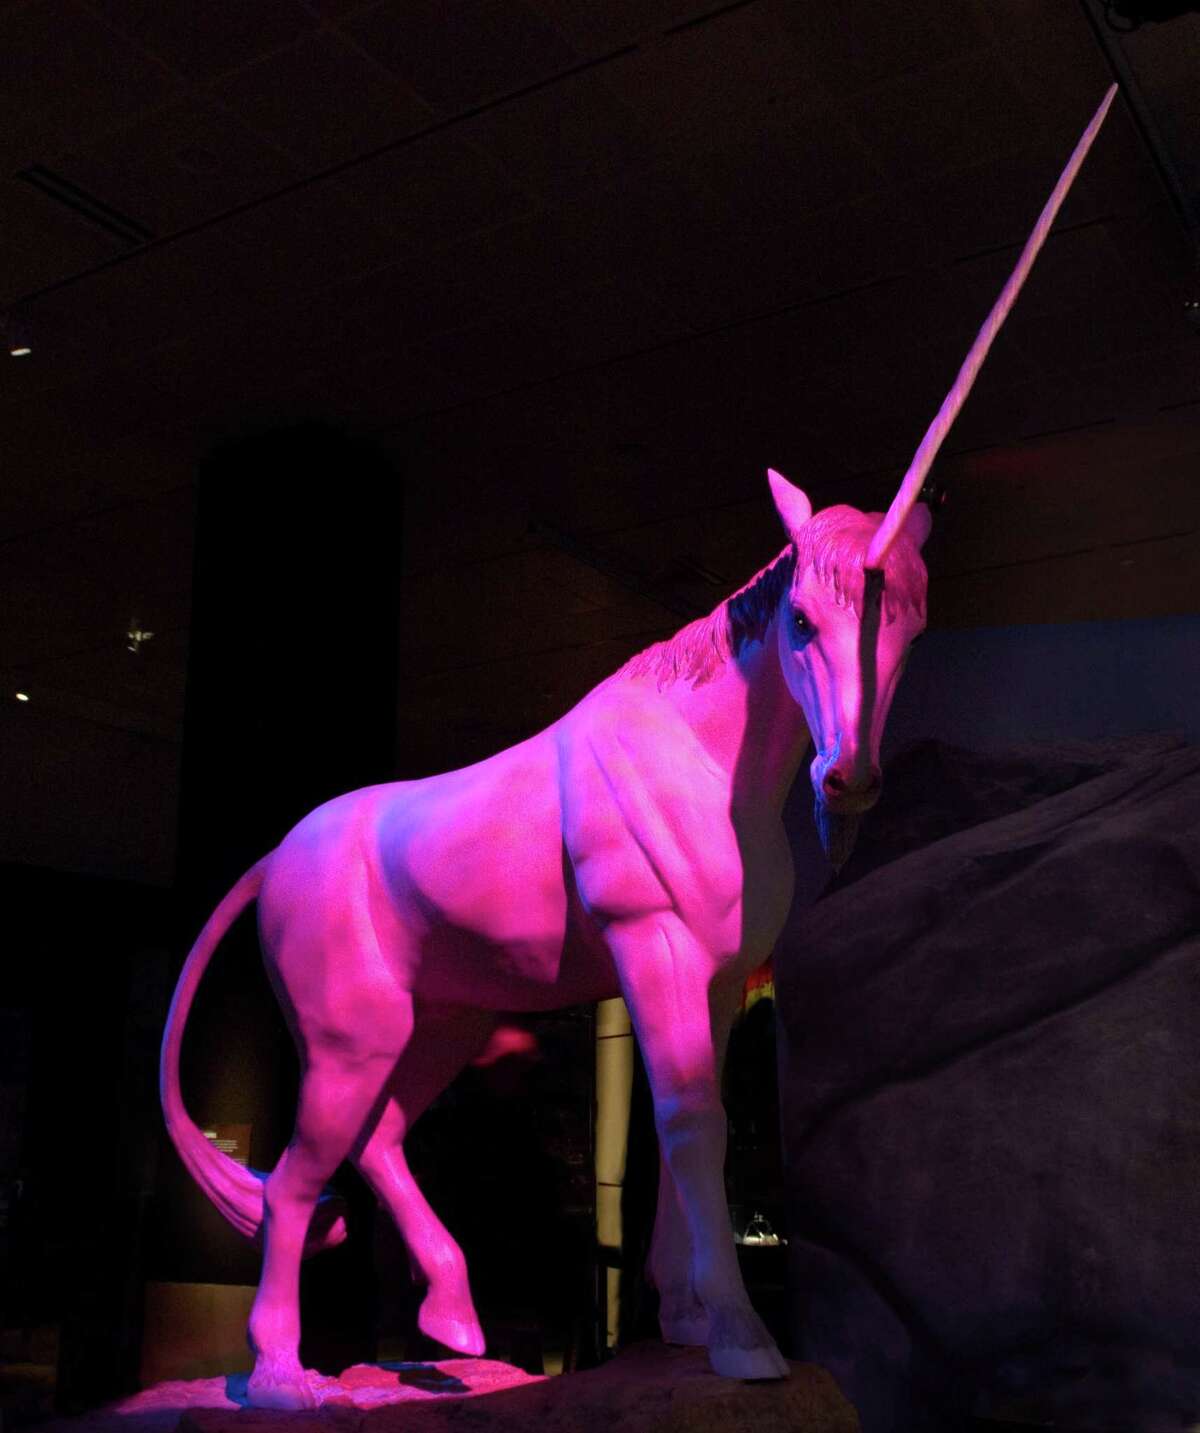 Unicorns are among the magical critters explored in "Mythic Creatures: Dragons, Unicorns and Mermaids," one of the big fall shows at the Witte Museum.